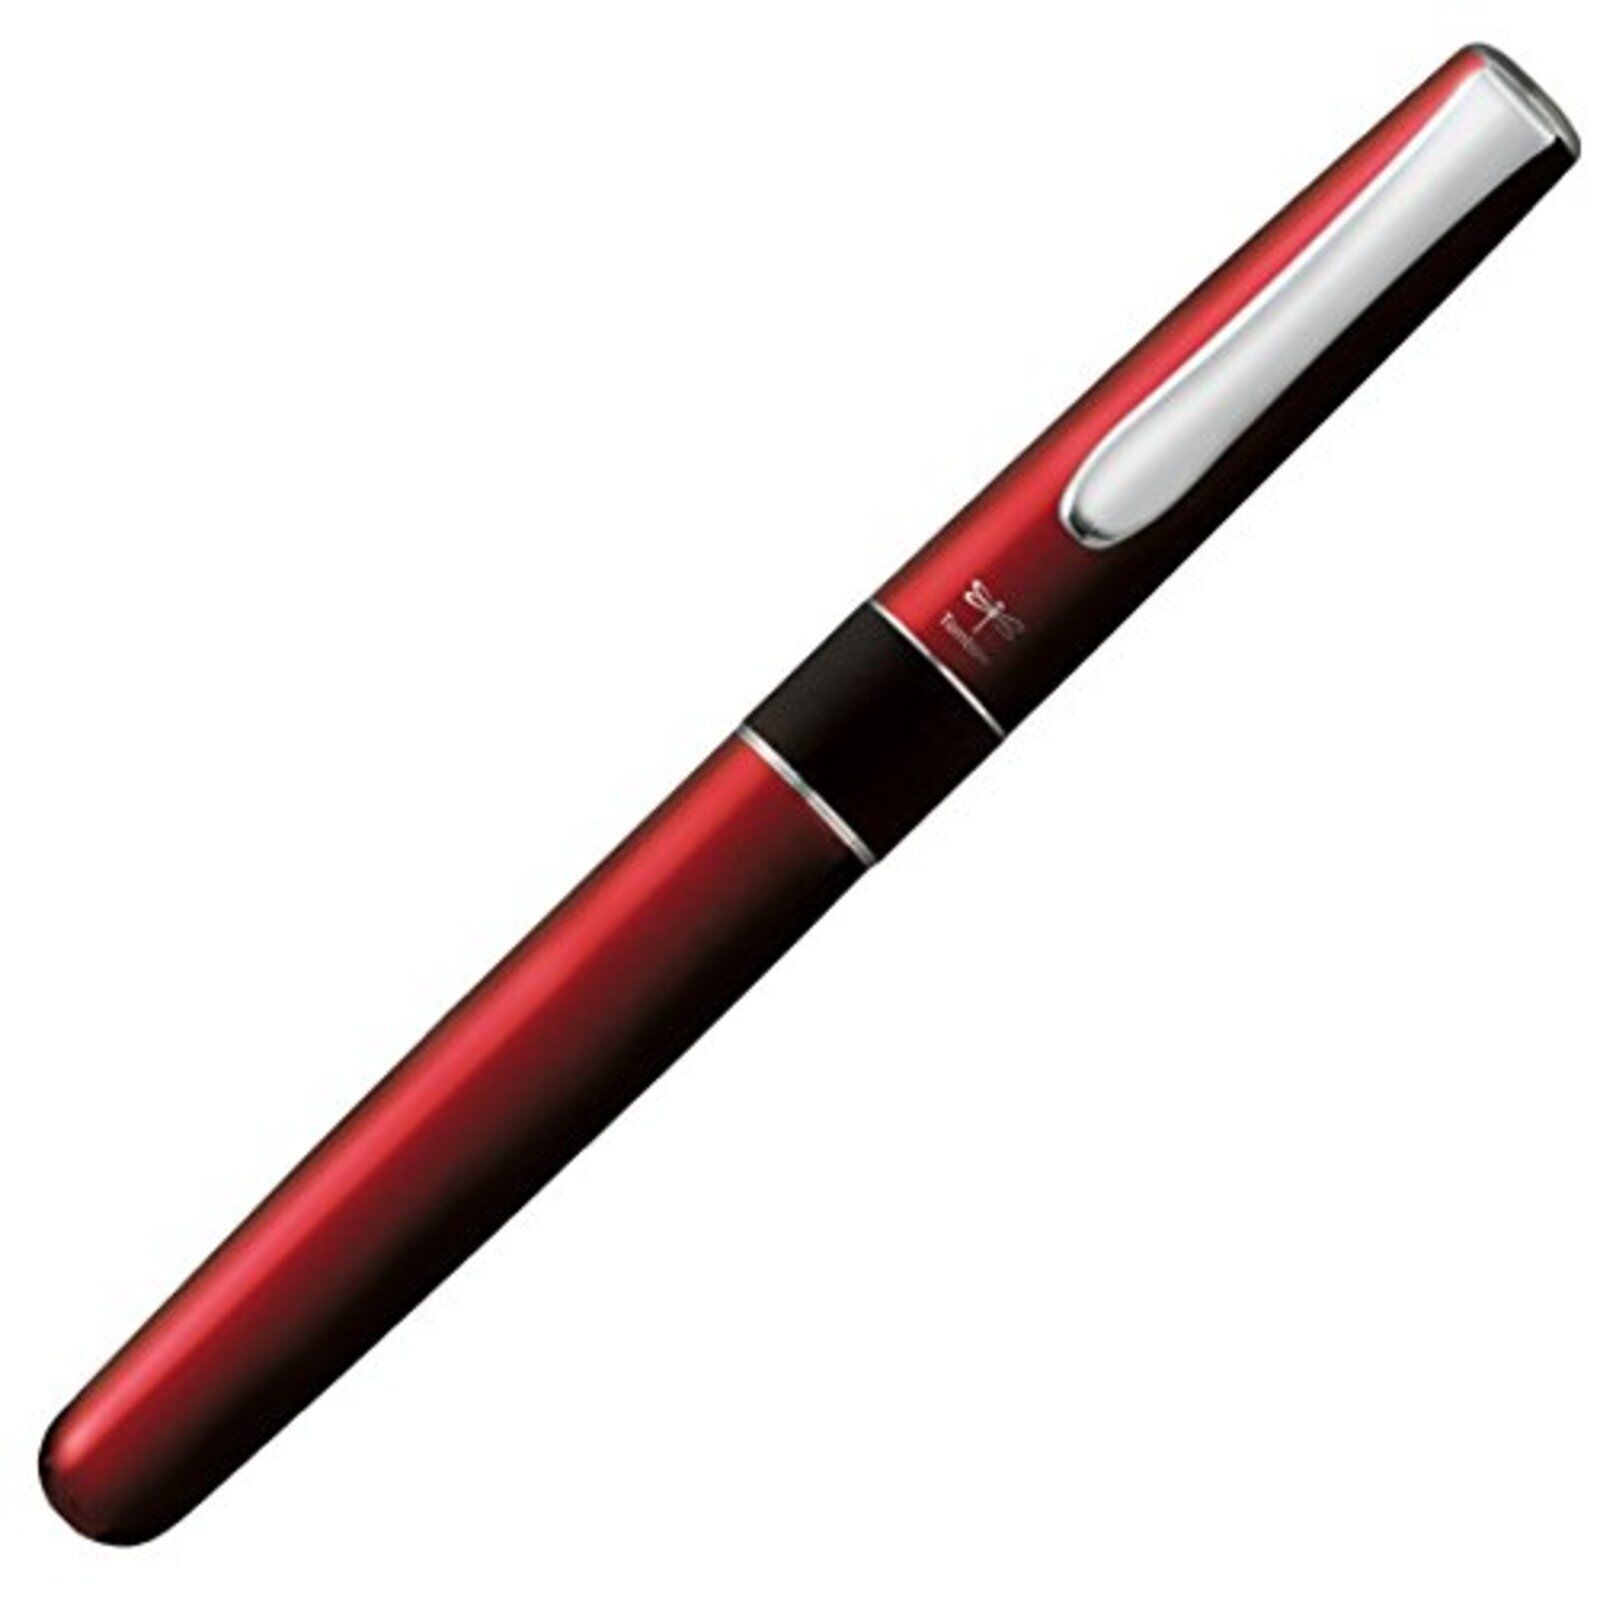 Tombow Zoom 505, 0.5mm Ballpoint Pen, Red Body (BW-2000LZA31) F/S w/Tracking#